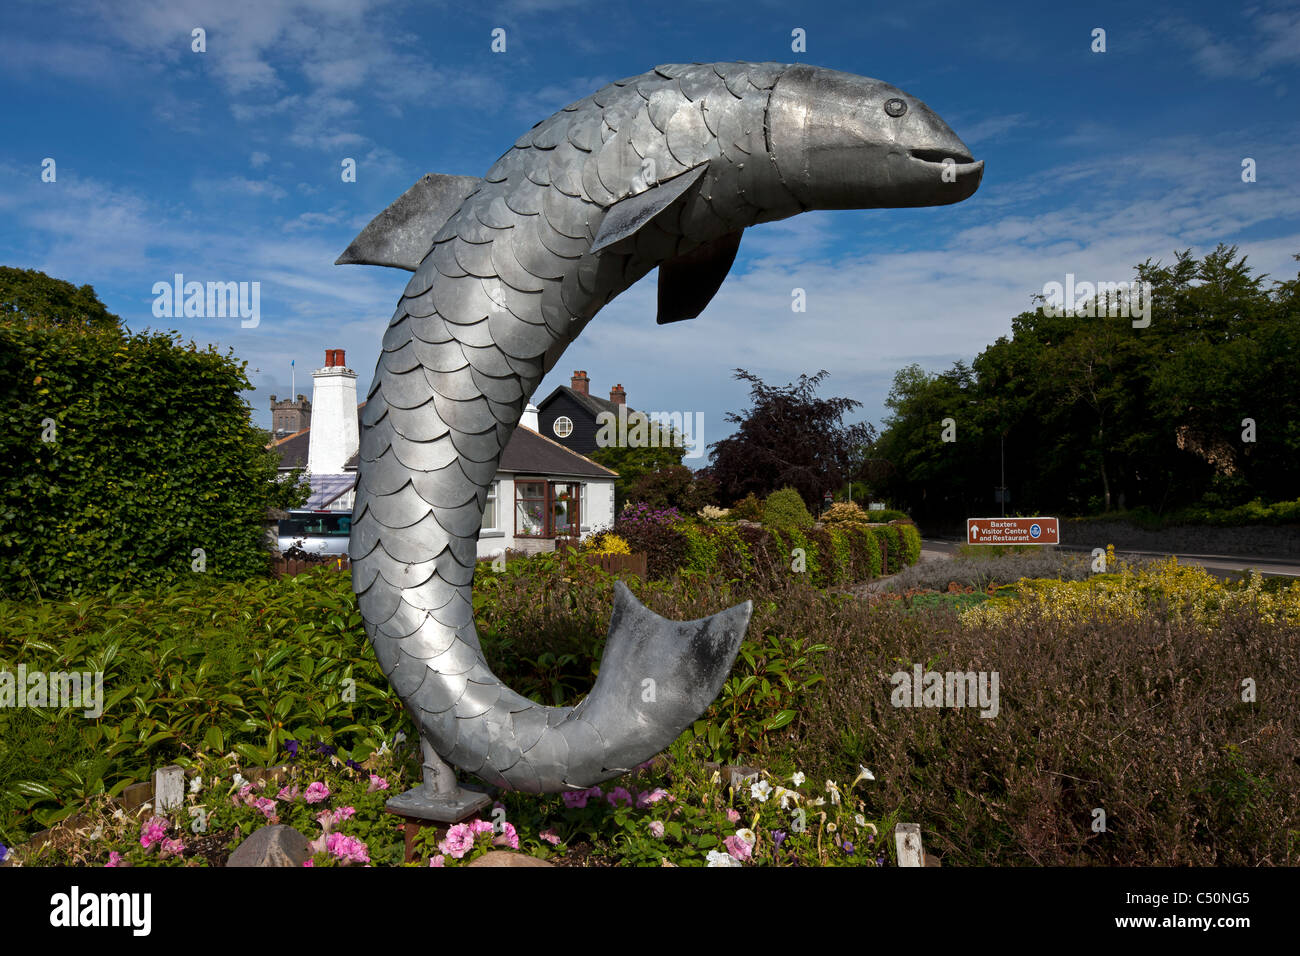 Fochabers fish statue at the entrance to Fochabers village, Moray Firth, Scotland Stock Photo